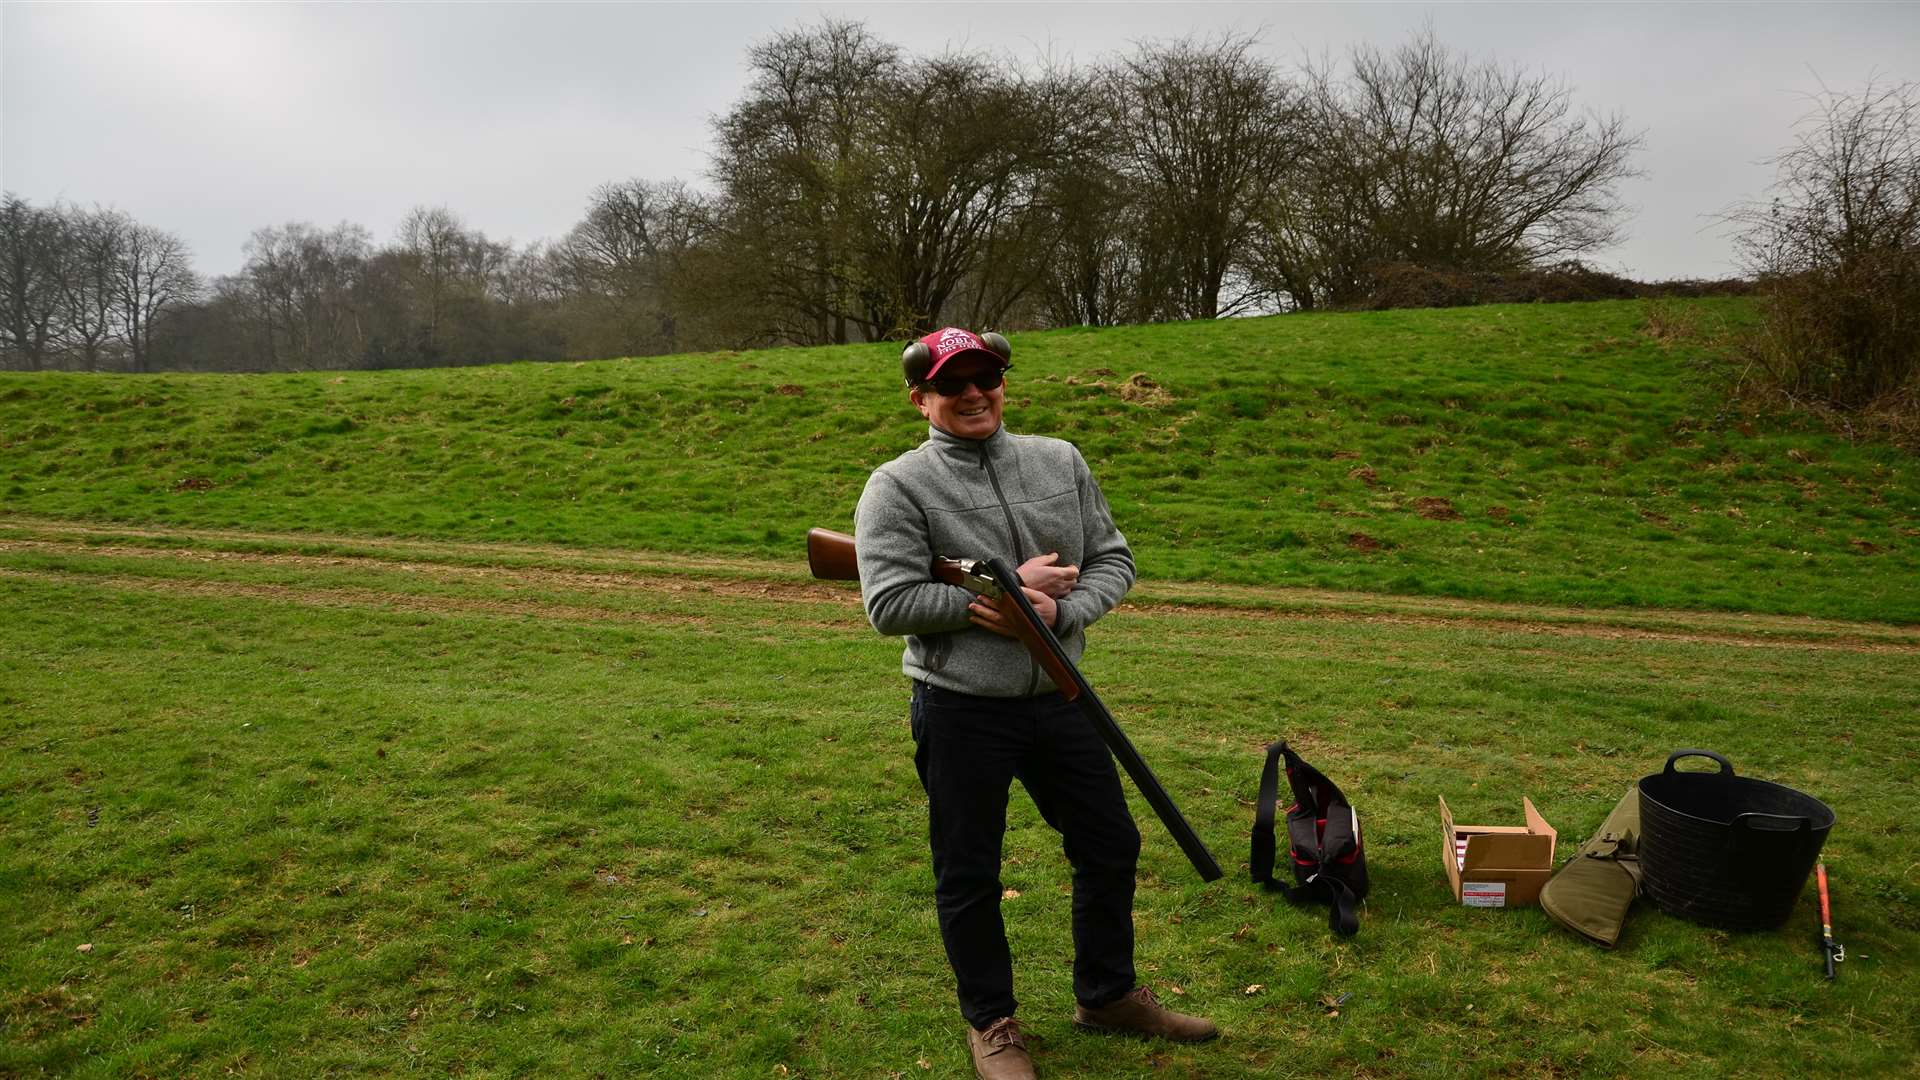 Jeff Fuidge ready for action at Noble Field Sports on Squerryes Estate, Westerham